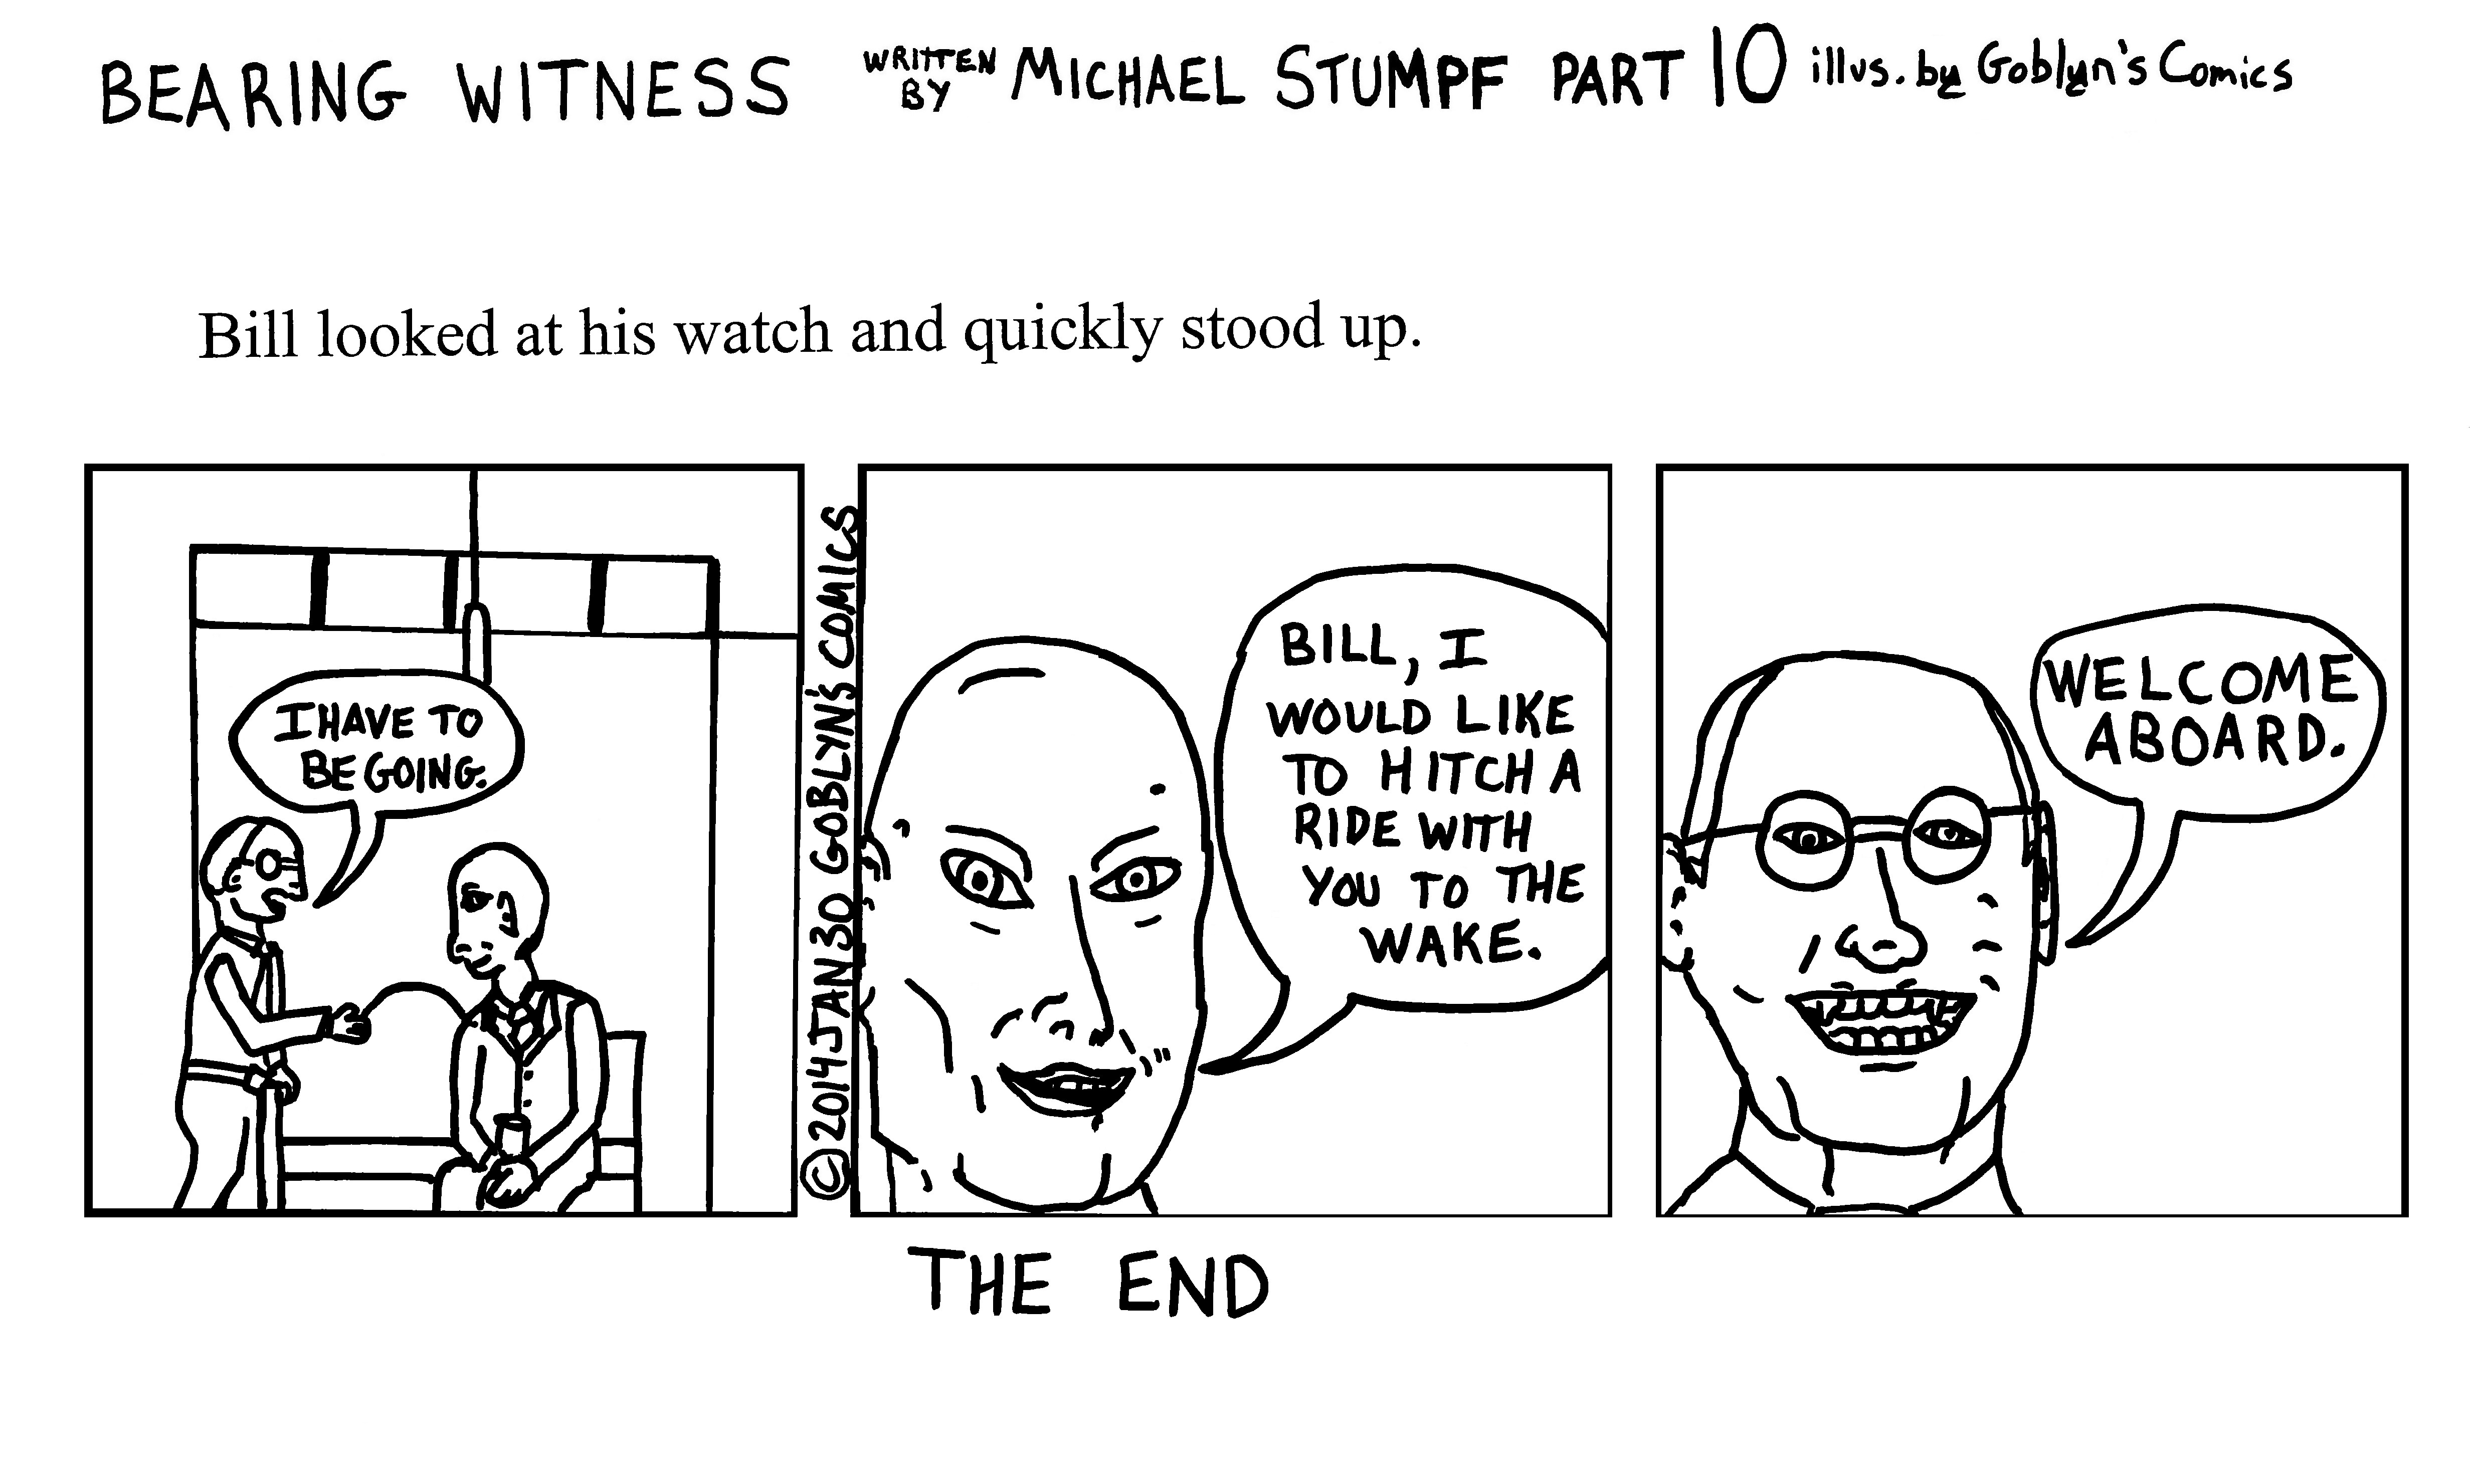 Bearing Witness by Michael Stumpf, illustrated by Goblyn's Comics Part 10